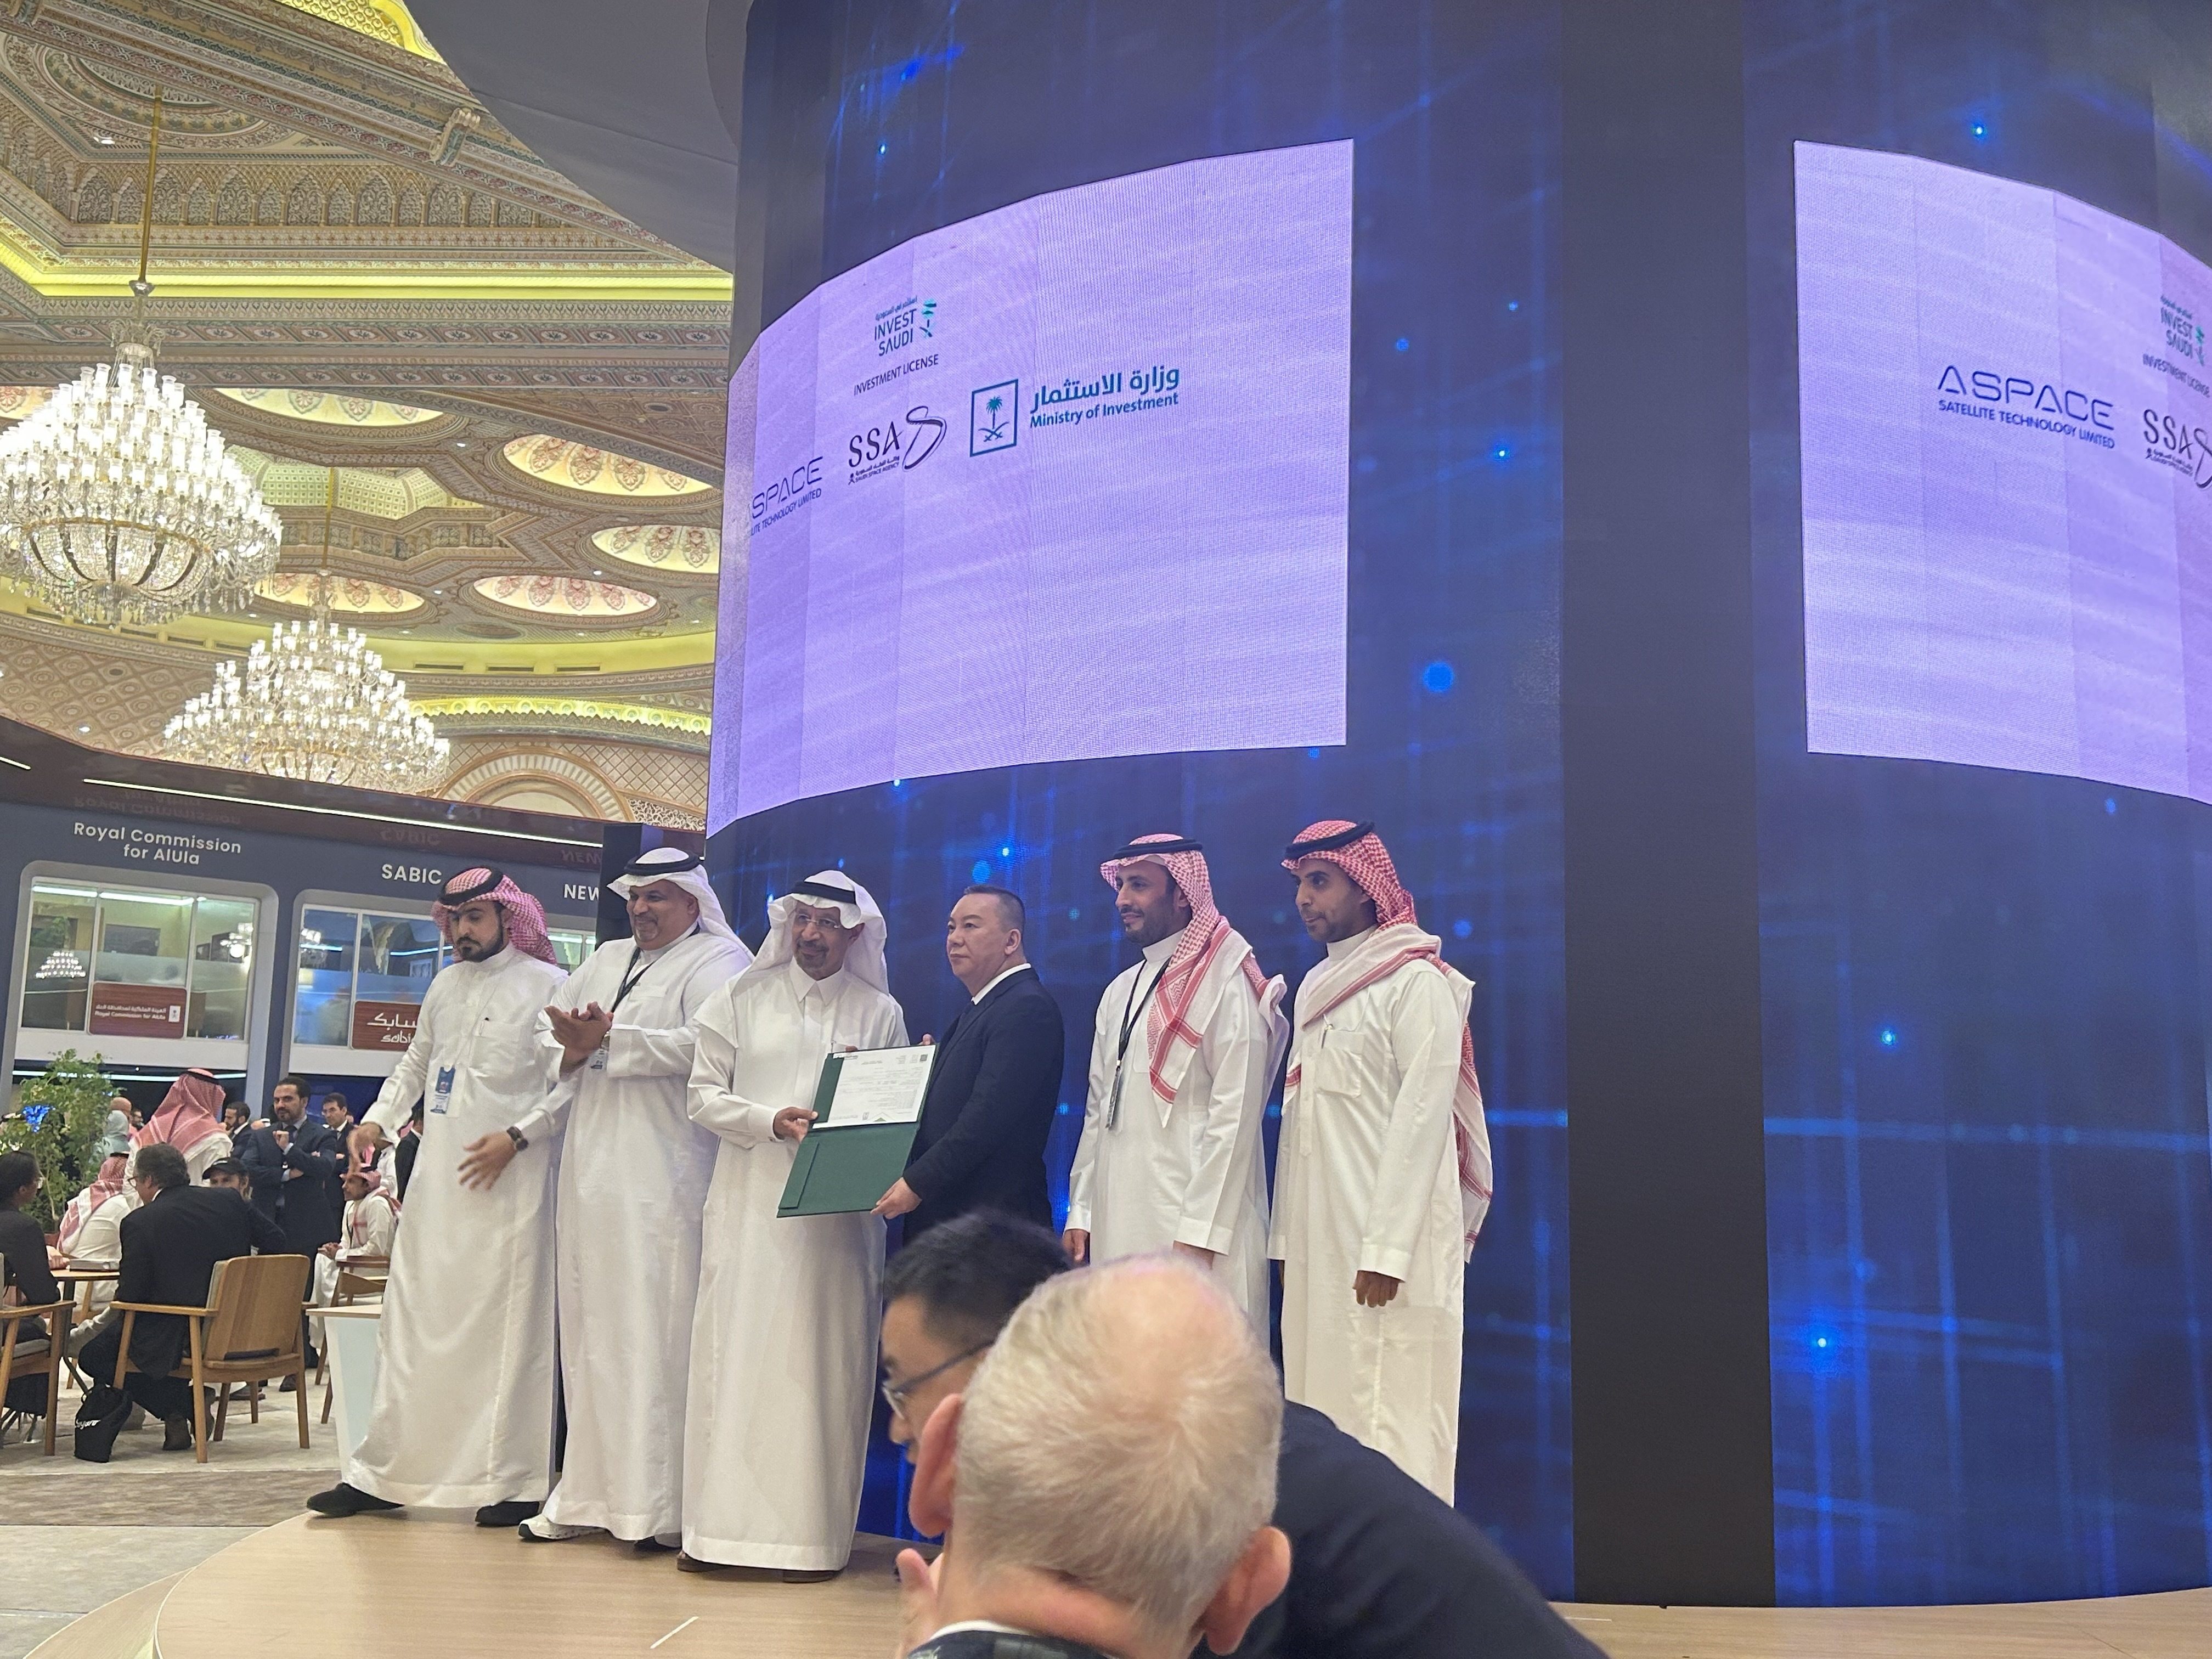 ASPACE’s Sun Fengquan receives an aerospace licence from Saudi Arabia’s minister of investment, Khalid Al-Falih, at a ceremony during the FII conference in Riyadh. Photo: Kandy Wong